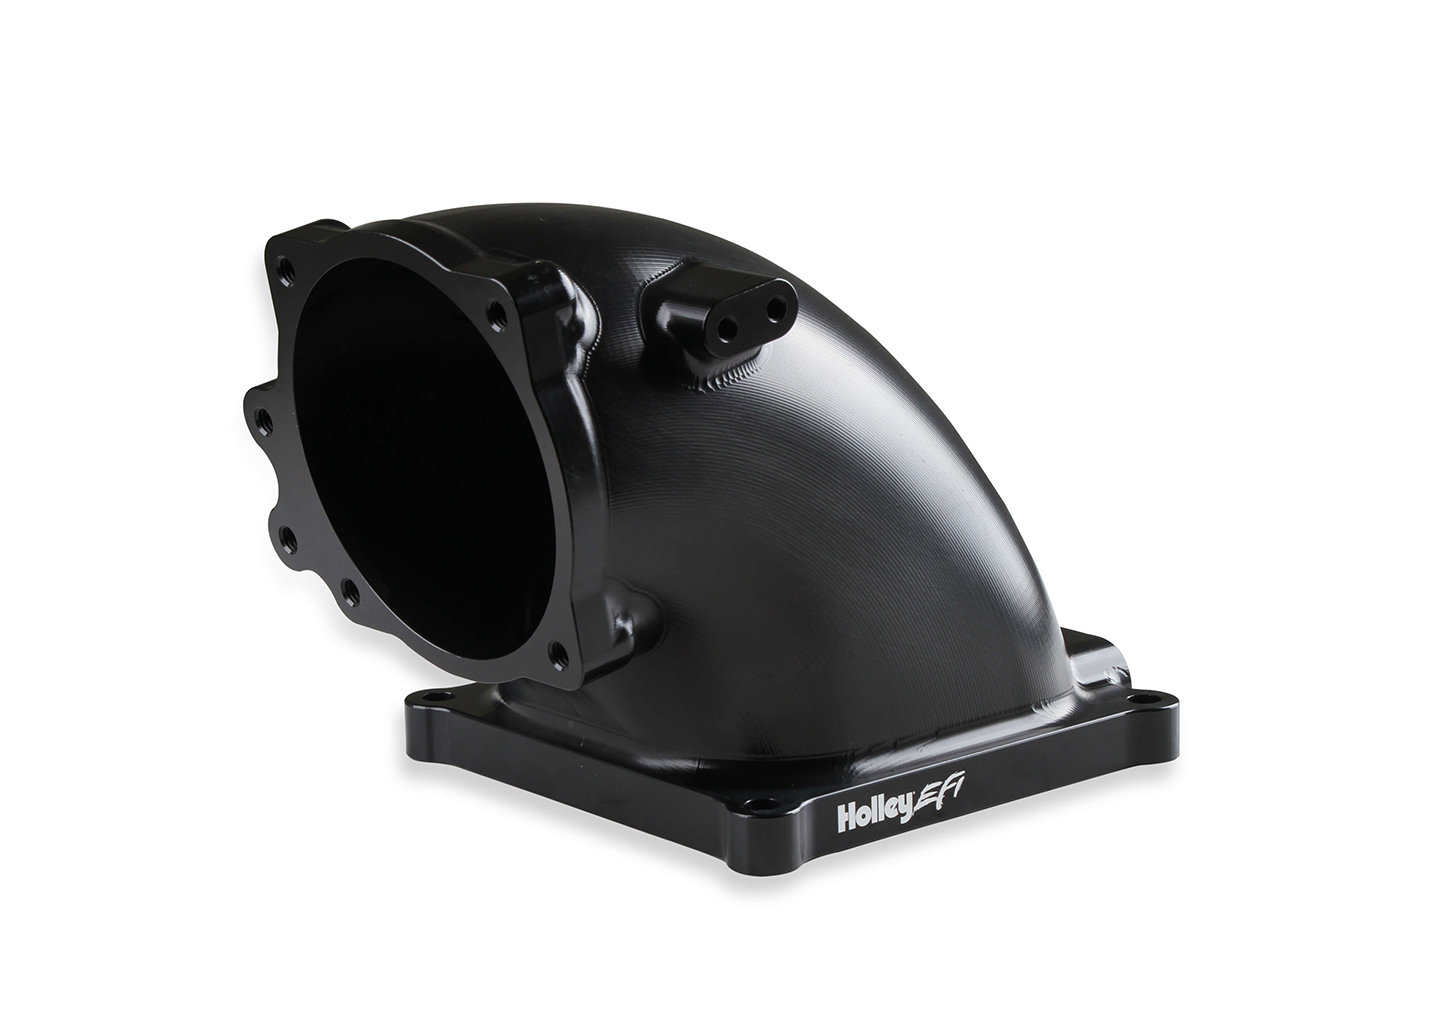 Holley 300-254BK Intake Elbow, Aluminum, Black Powder Coat, Ford Throttle Body to Dominator Mounting Flange, Each